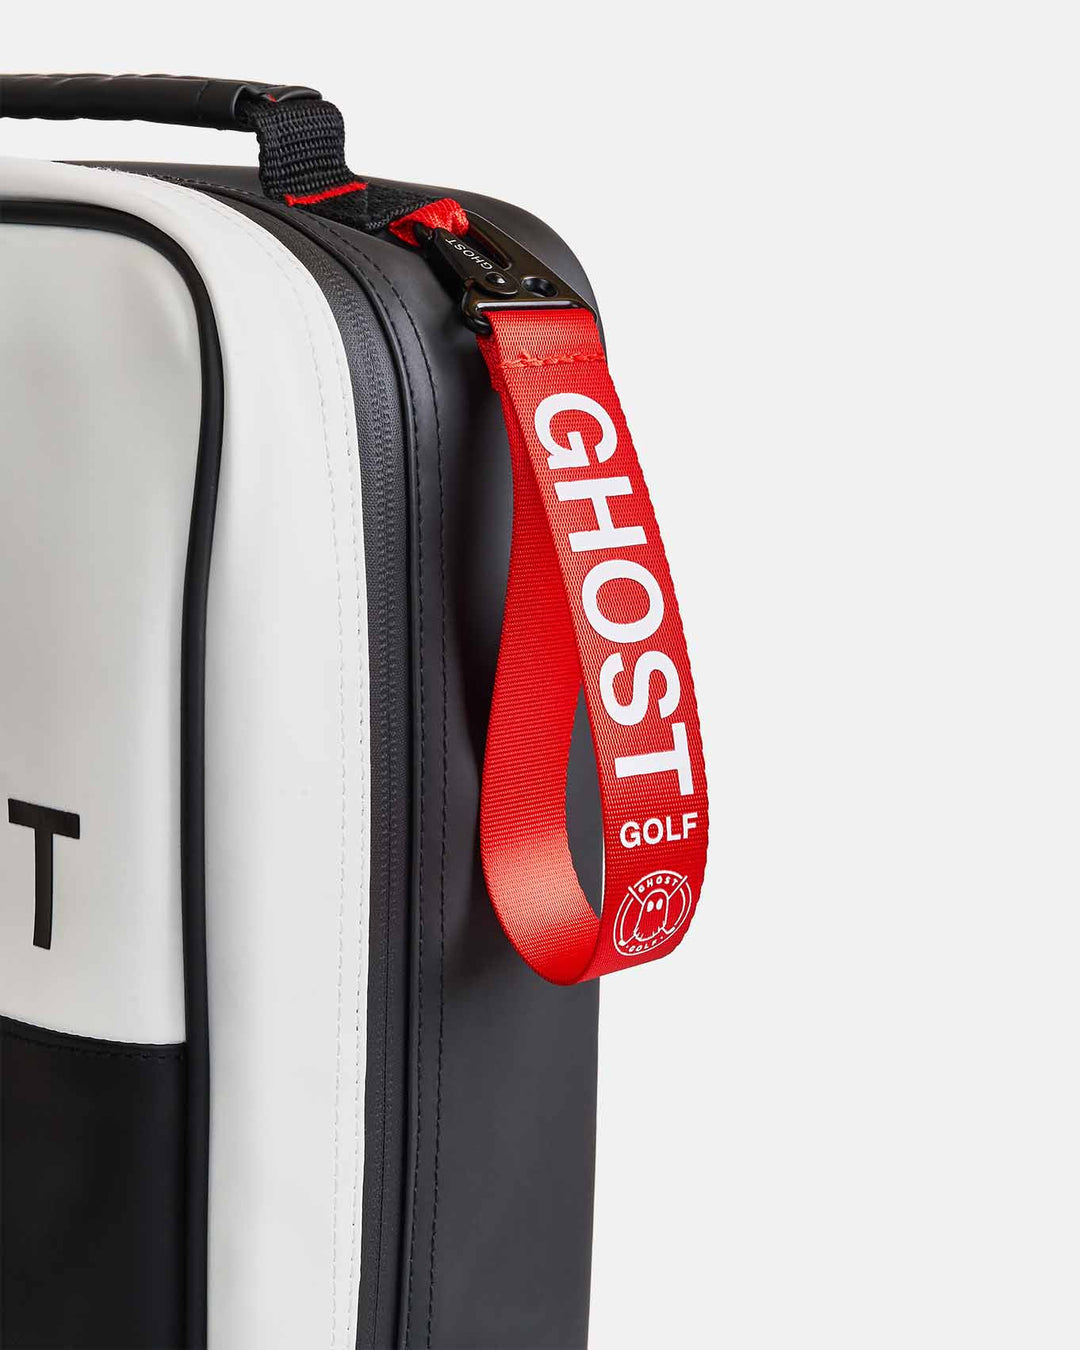 GhostGolf - That feeling when your new Ghost Golf Bag